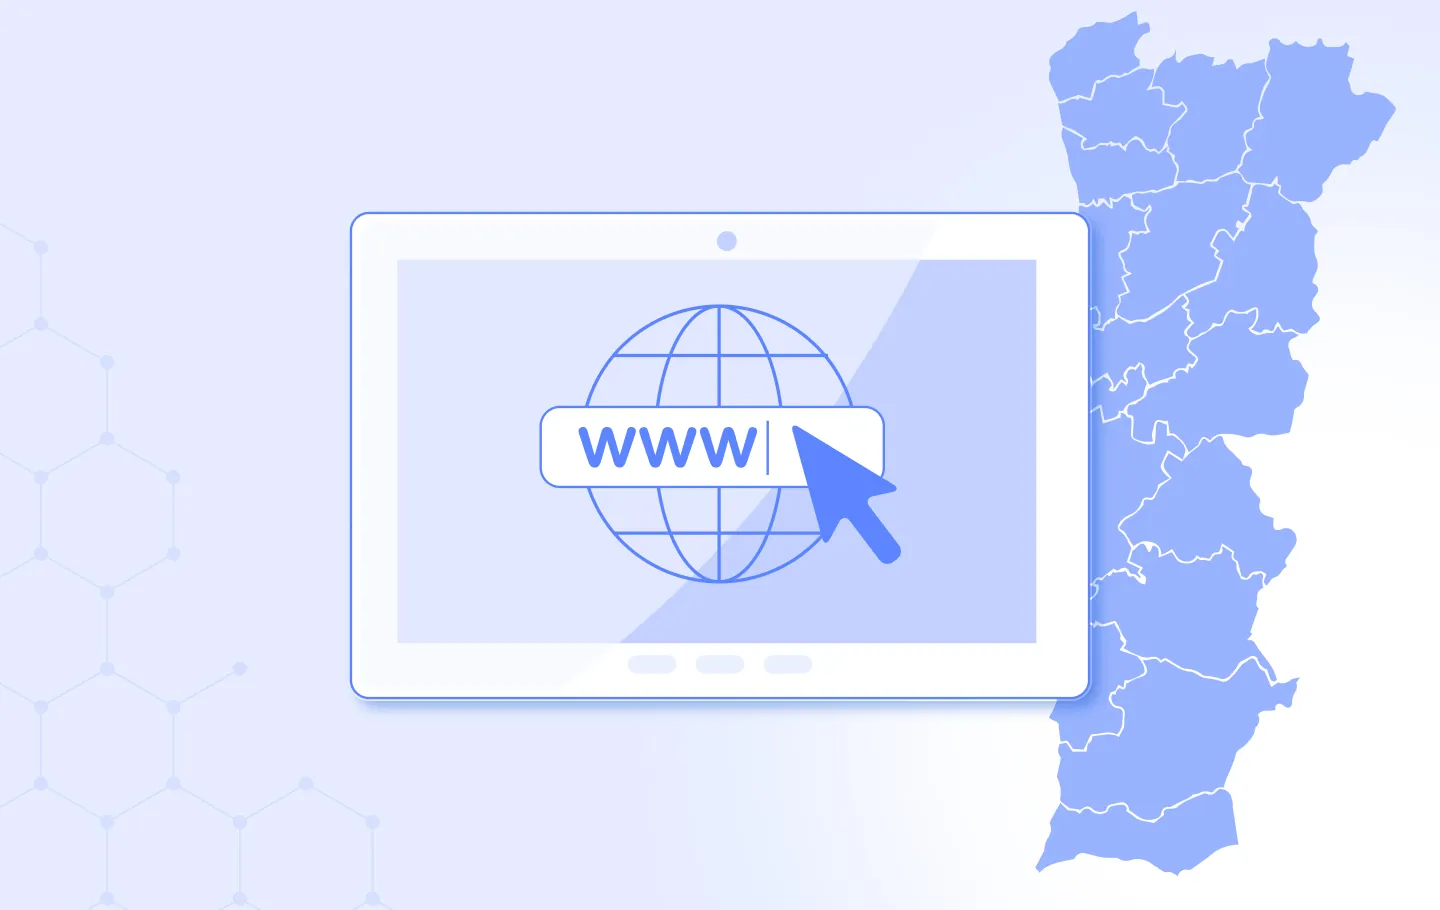 Portuguese domains are prone to phishing